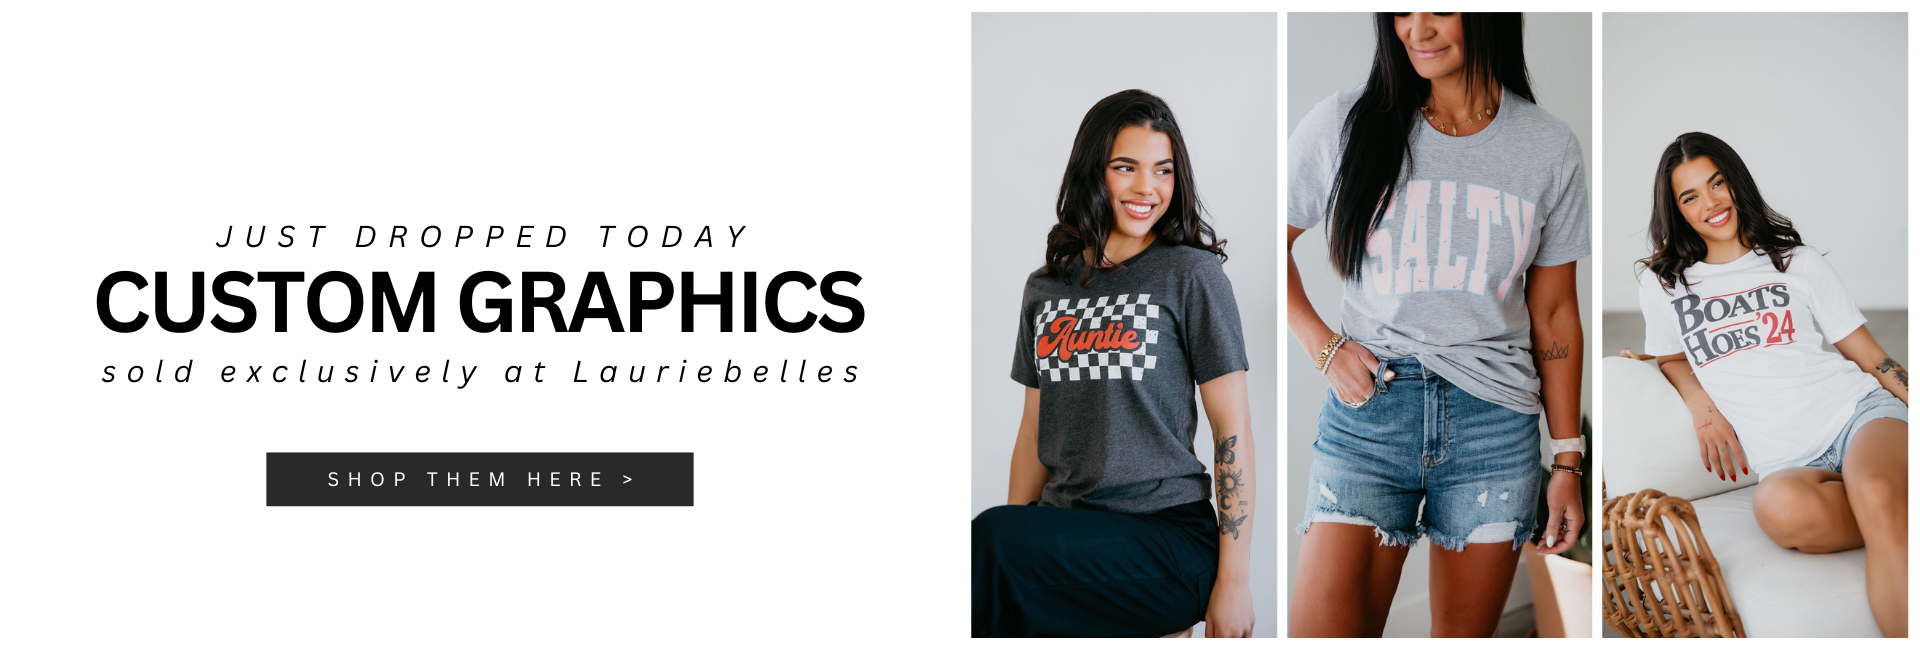 Model posing in Lauriebelles graphic shirts